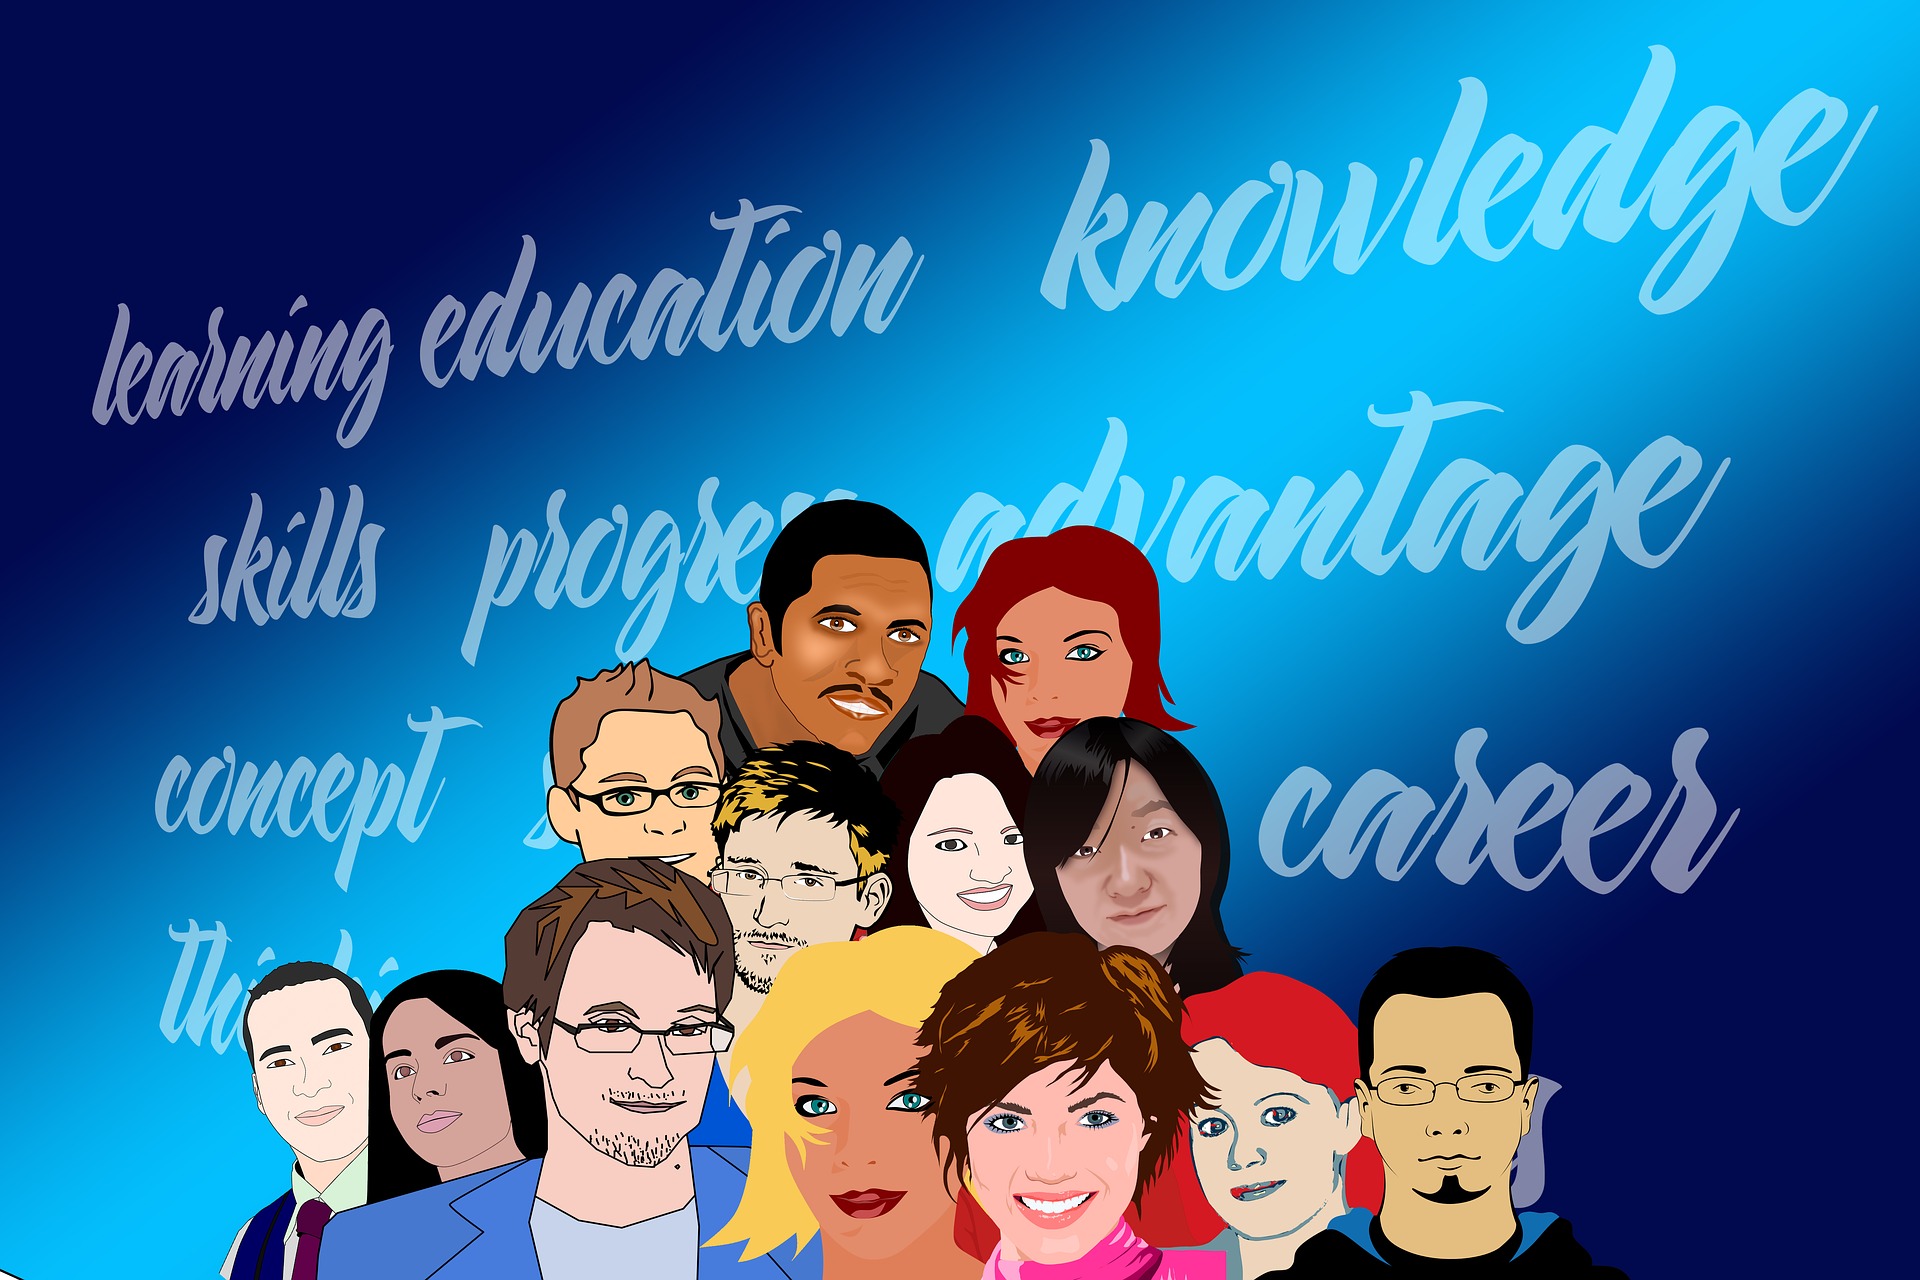 Illustration of different kinds of people in front of a background reading "education, knowledge, skills, progress, career"